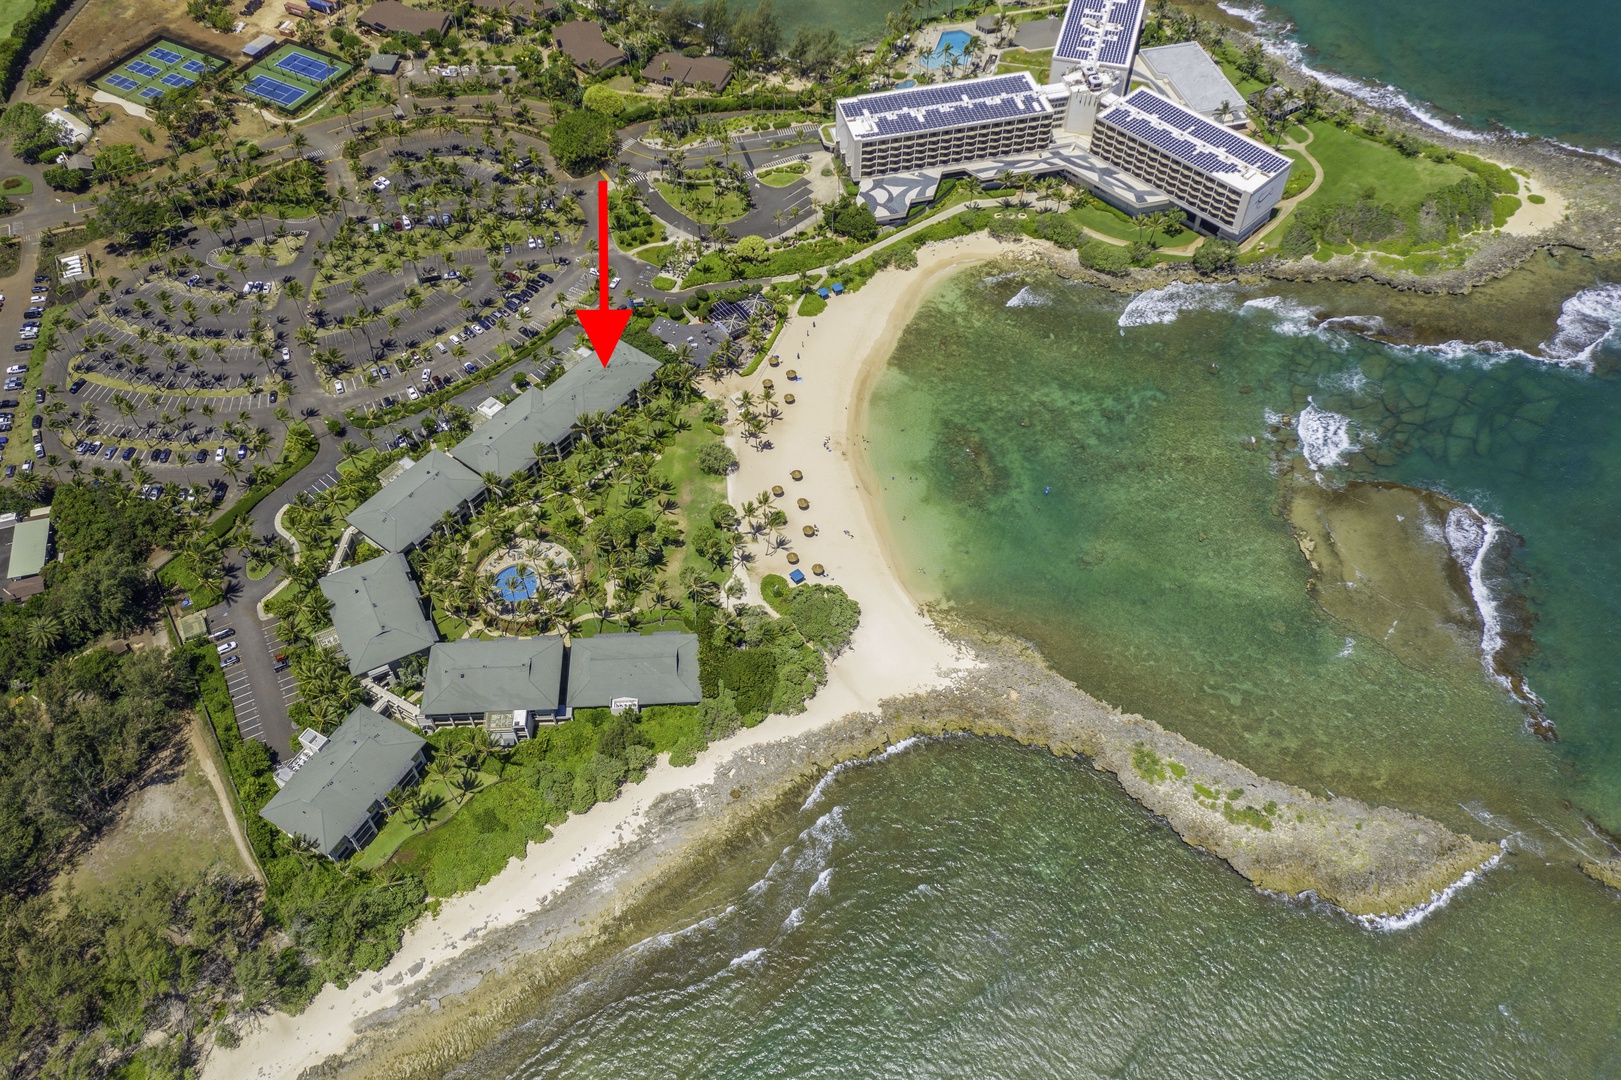 Kahuku Vacation Rentals, OFB Turtle Bay Villas 303 - Located in Bldg F (closest to resort)